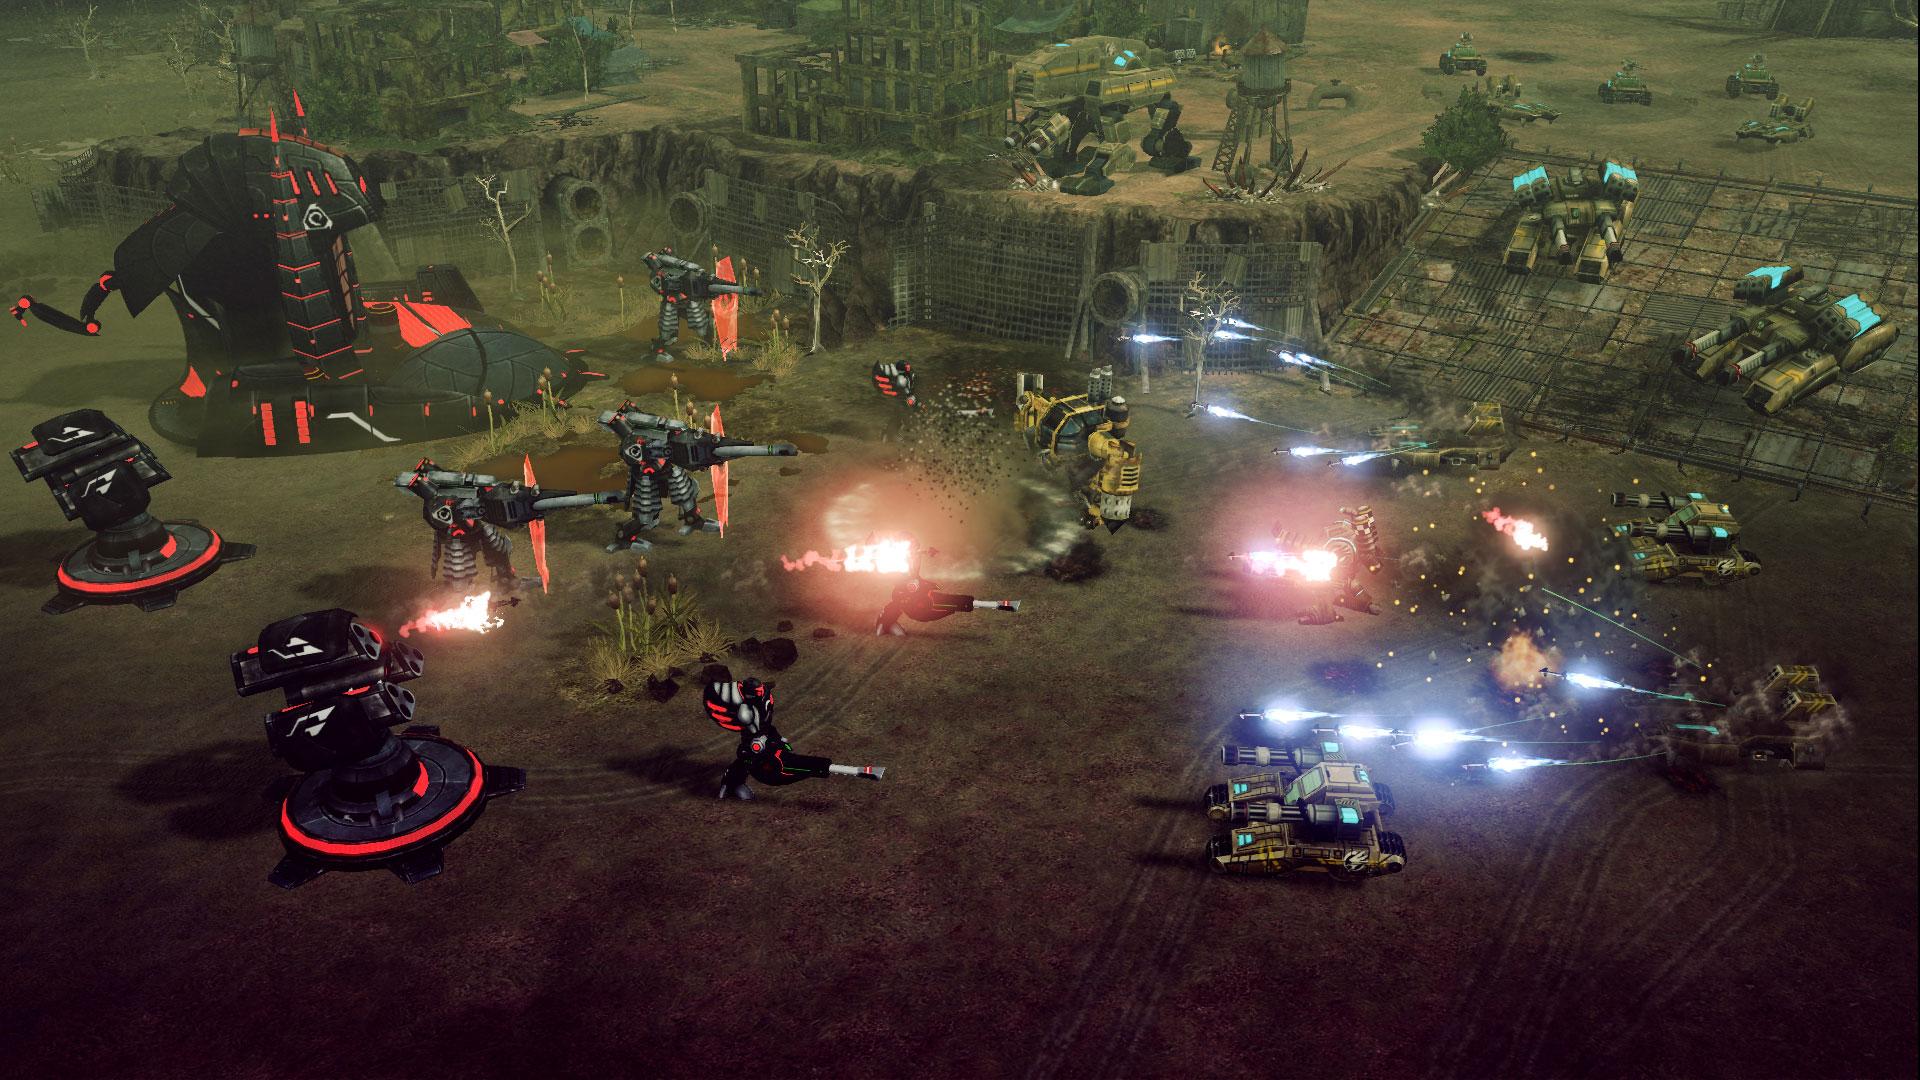 command and conquer 4 wikia